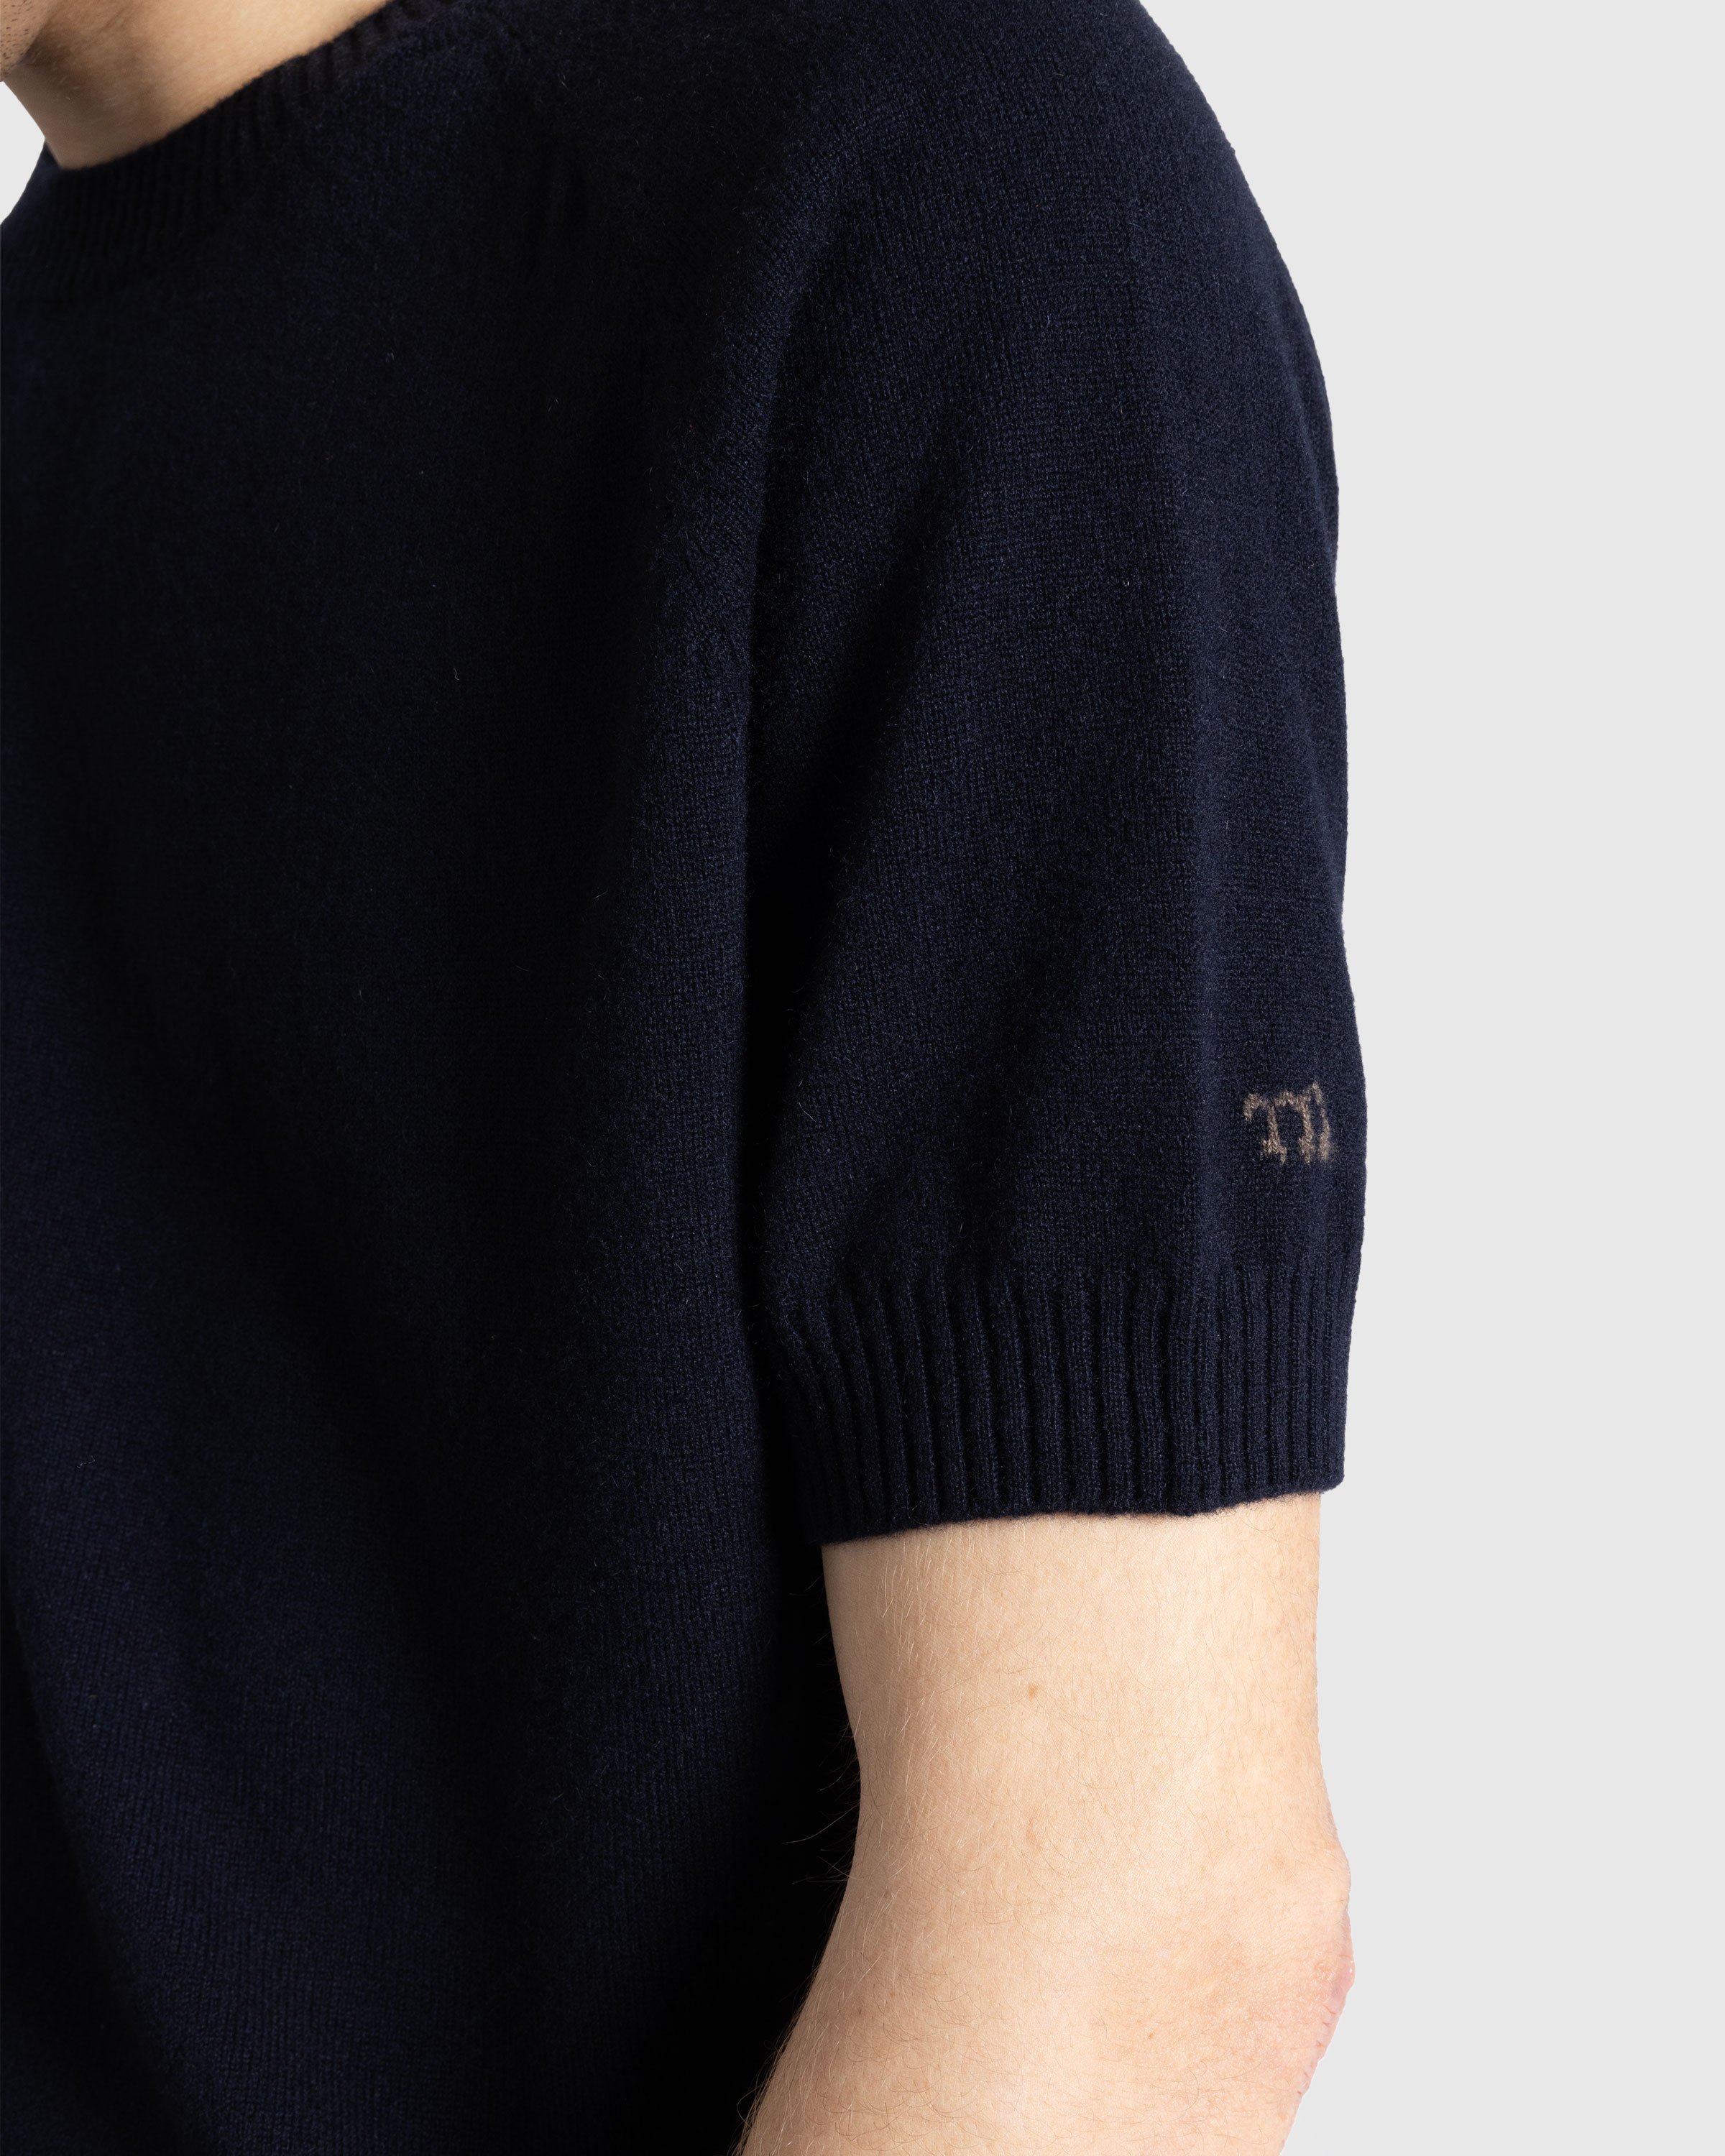 Meta Campania Collective - Jack Crew Neck Cashmere Short Sleeve Sweater  Midnight Blue - Clothing - Blue - Image 5